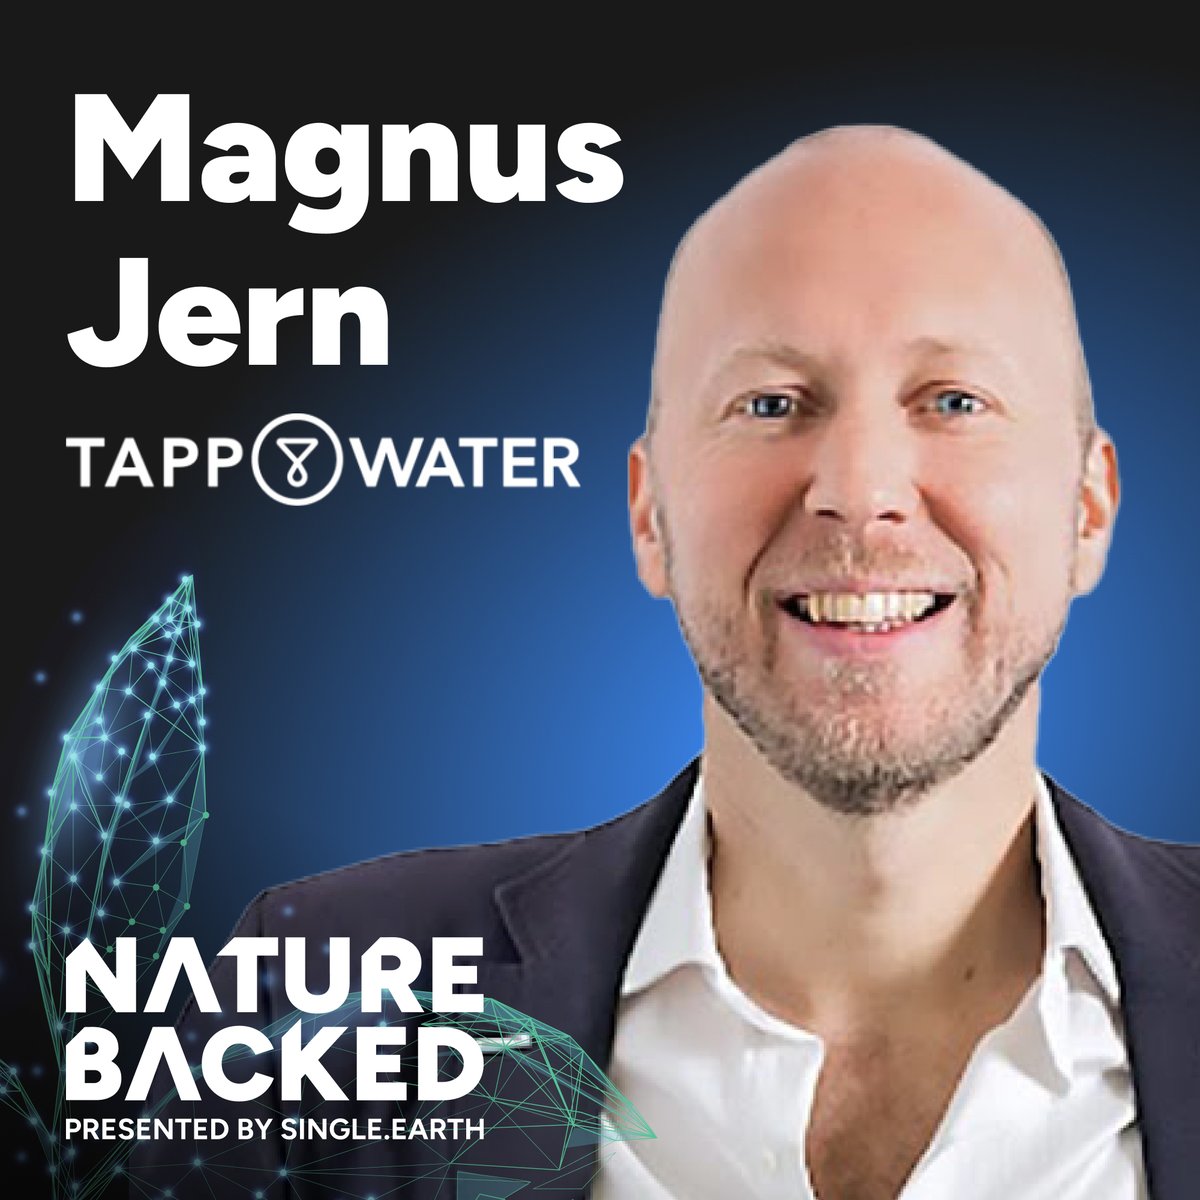 'In a nutshell, bottled water is really bad for the planet and just completely unnecessary,” says Magnus @Begreeneurope Jern on @NatureBacked #podcast. #PlasticWaste #BottledWater @TAPP_revolution Check out our discussion: open.spotify.com/episode/0LIhIN…